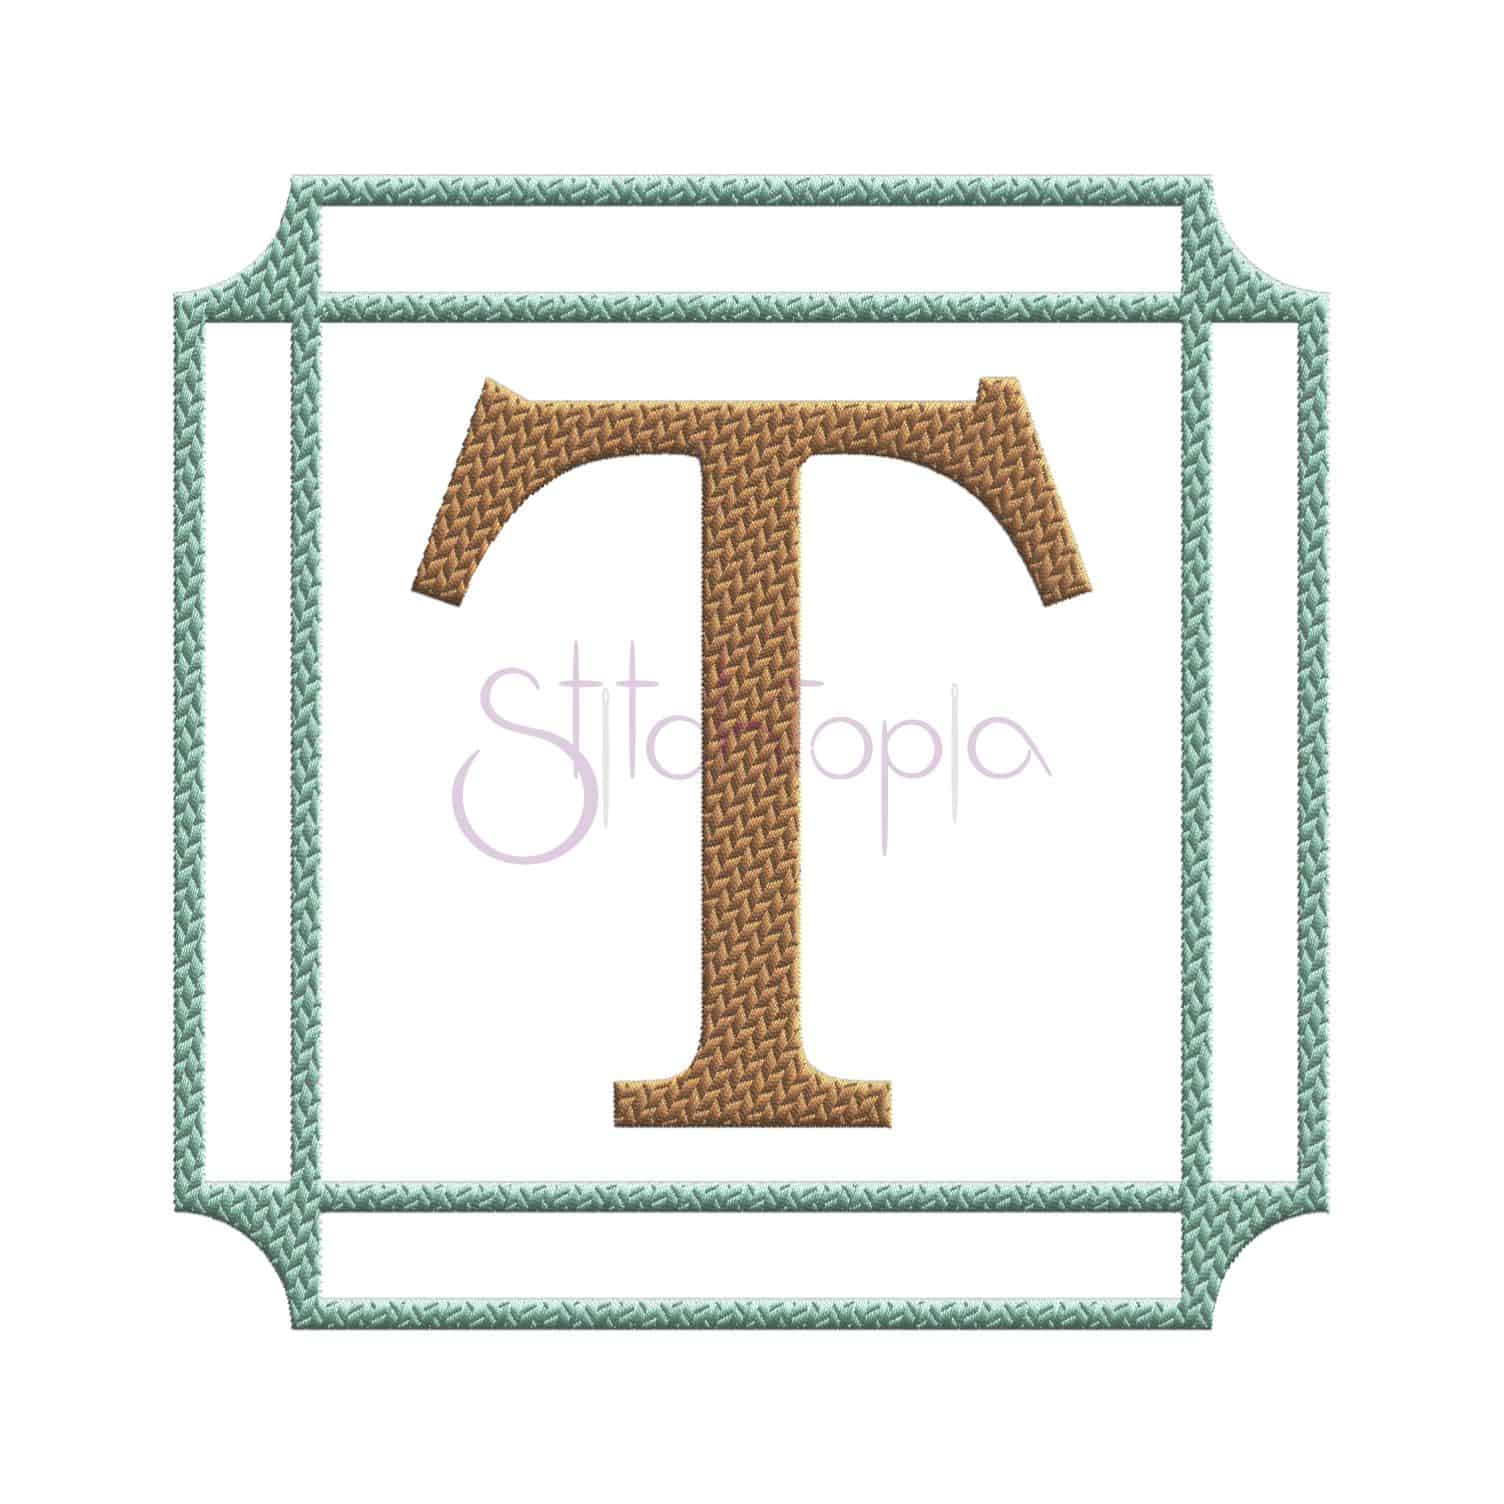 machine embroidery square frame simple